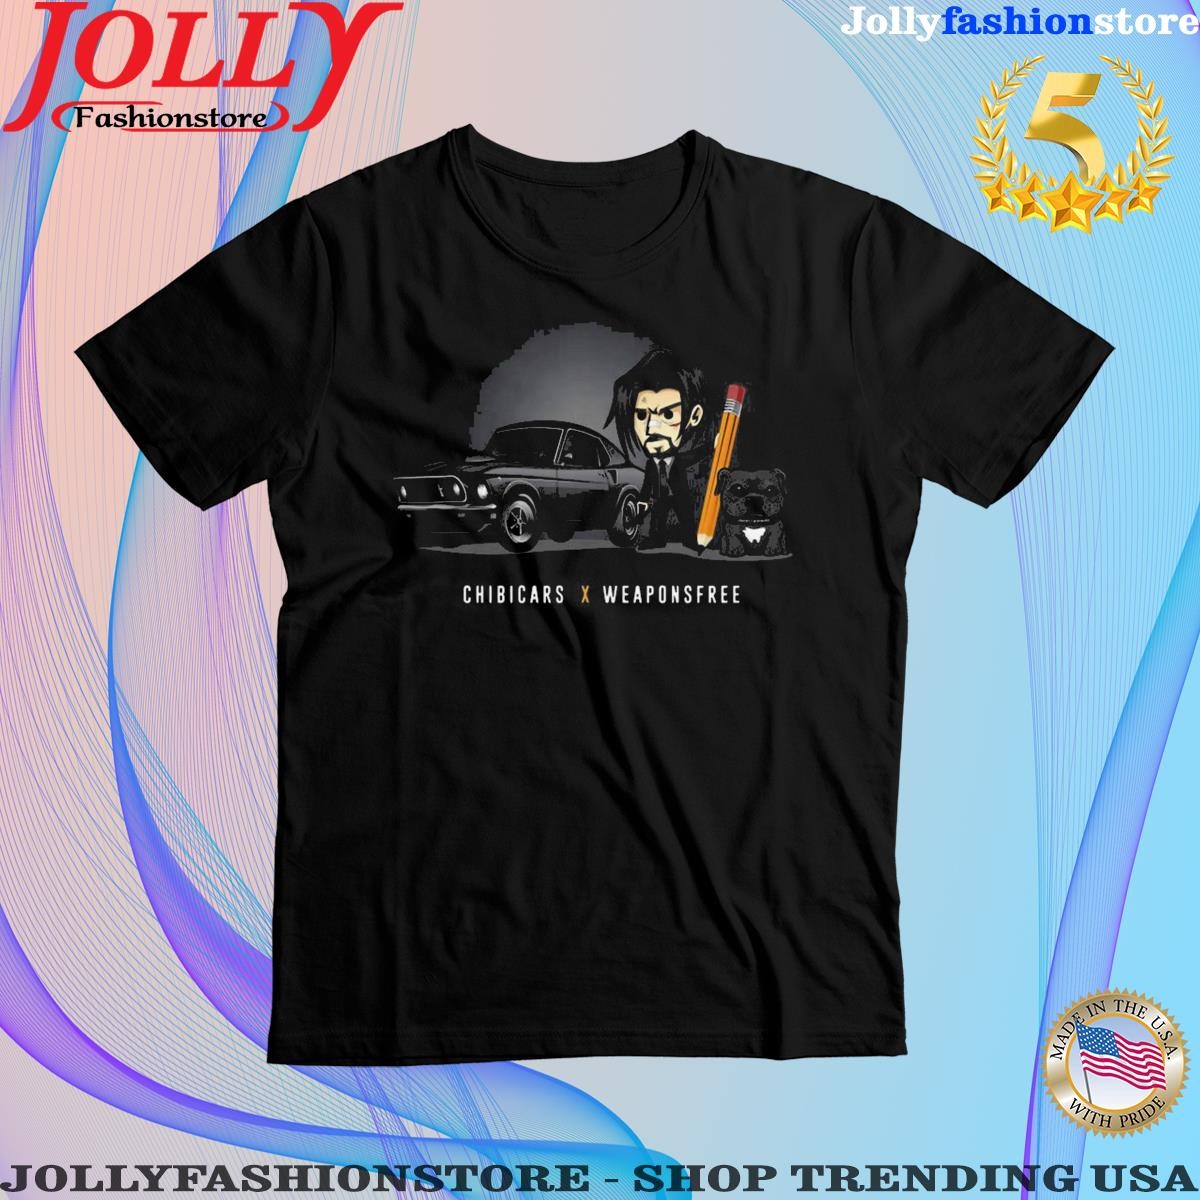 John wick and his dog chibicars x weaponsfree T-shirt